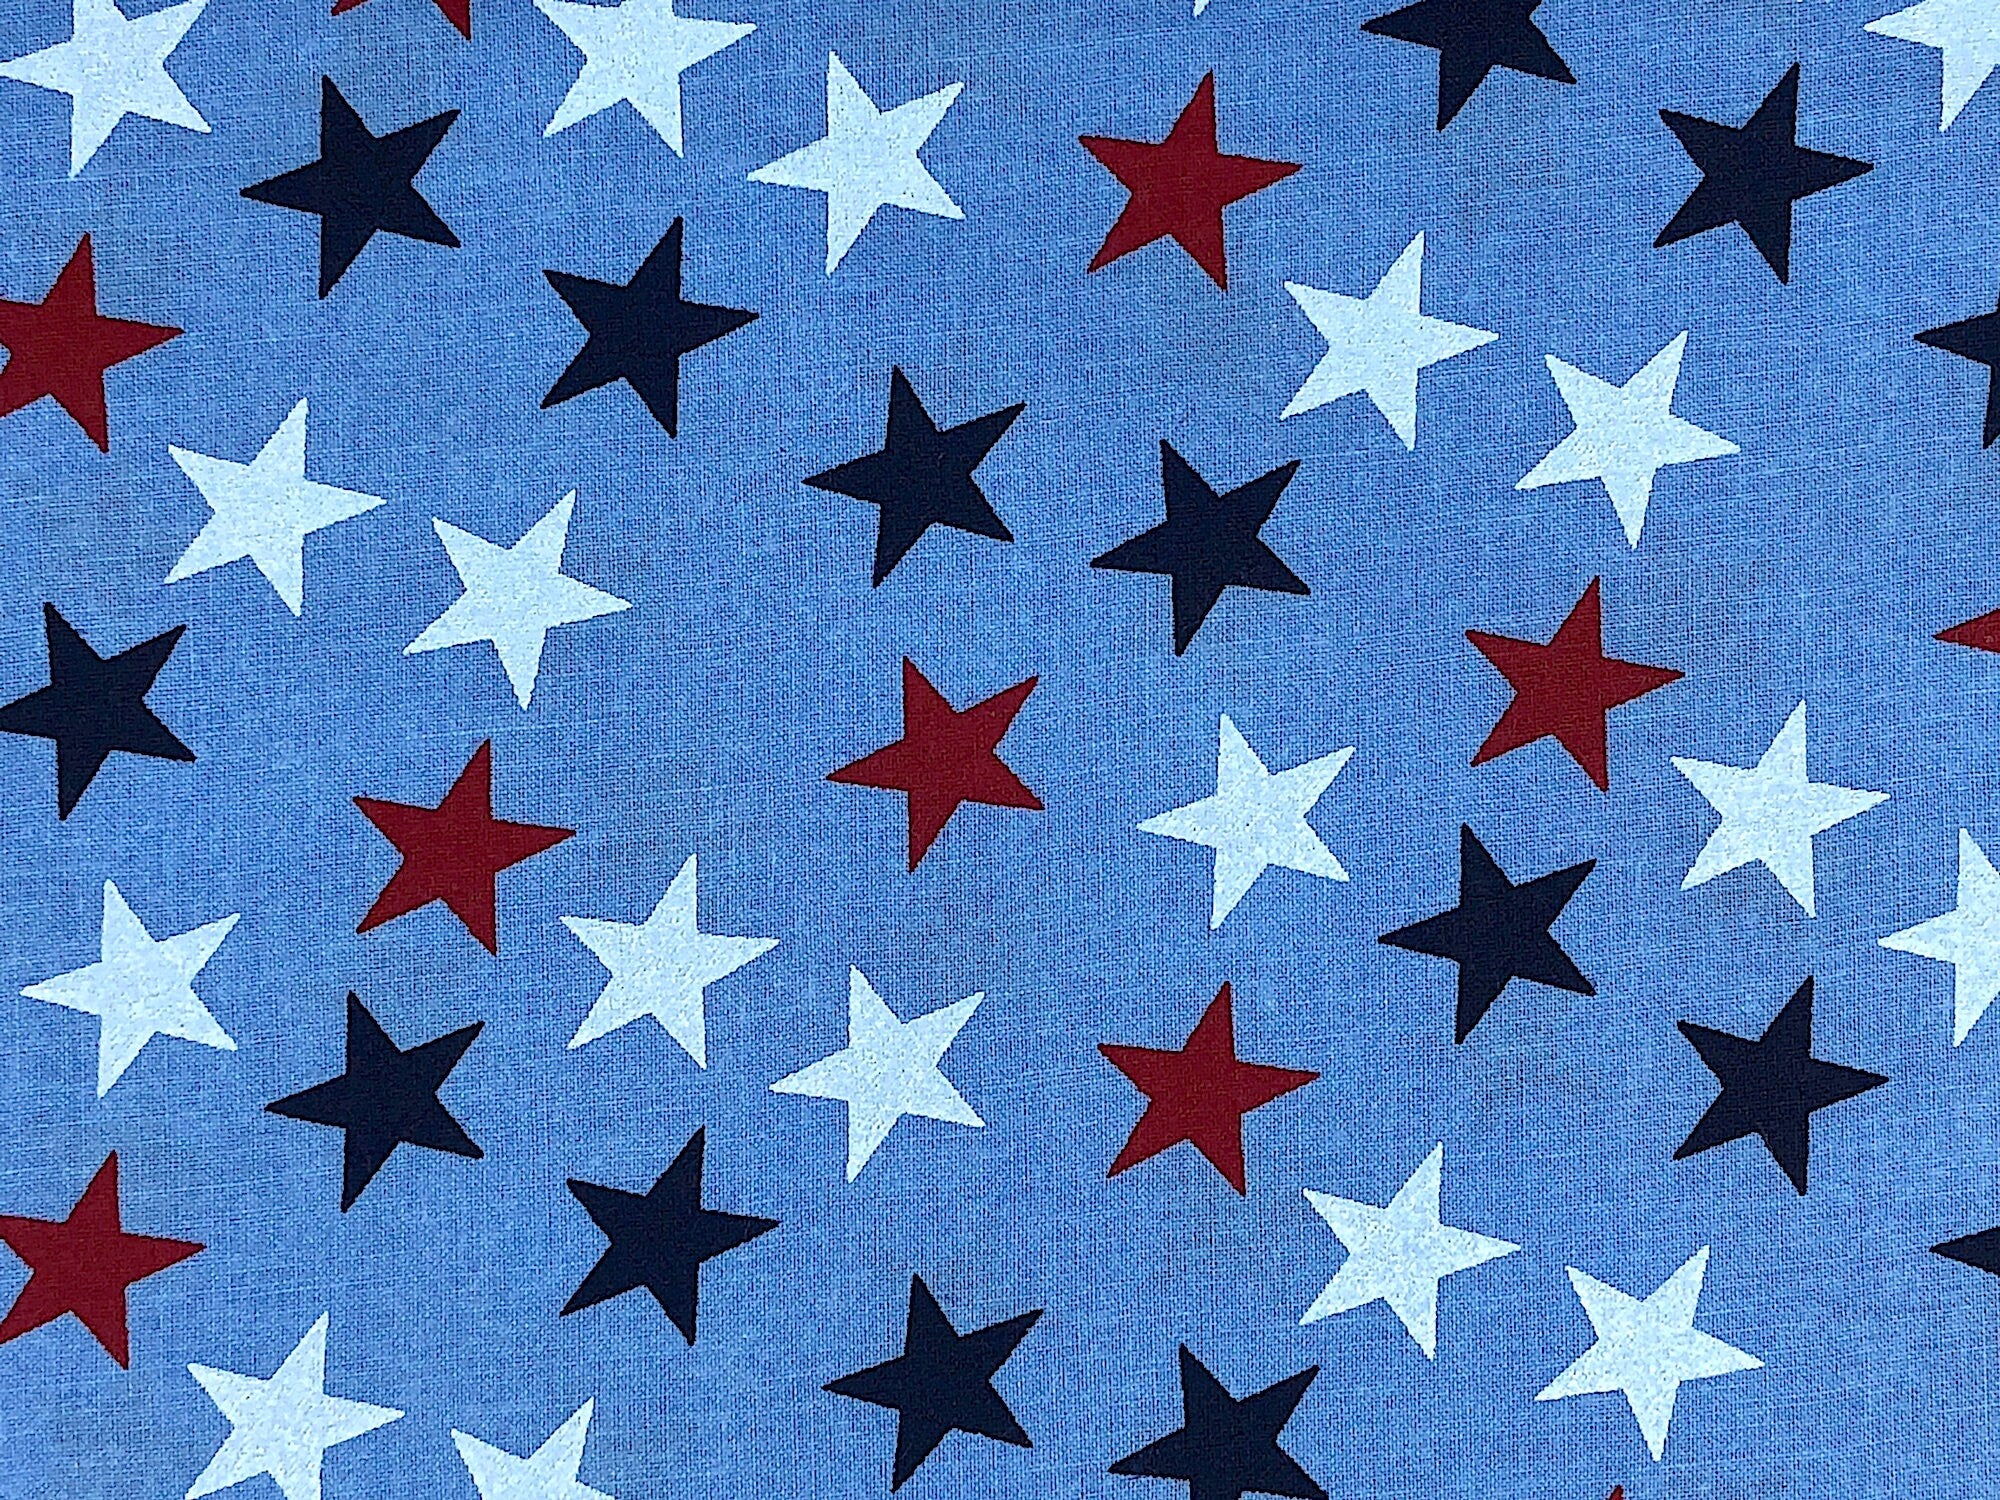 Close up of red, white and blue stars.